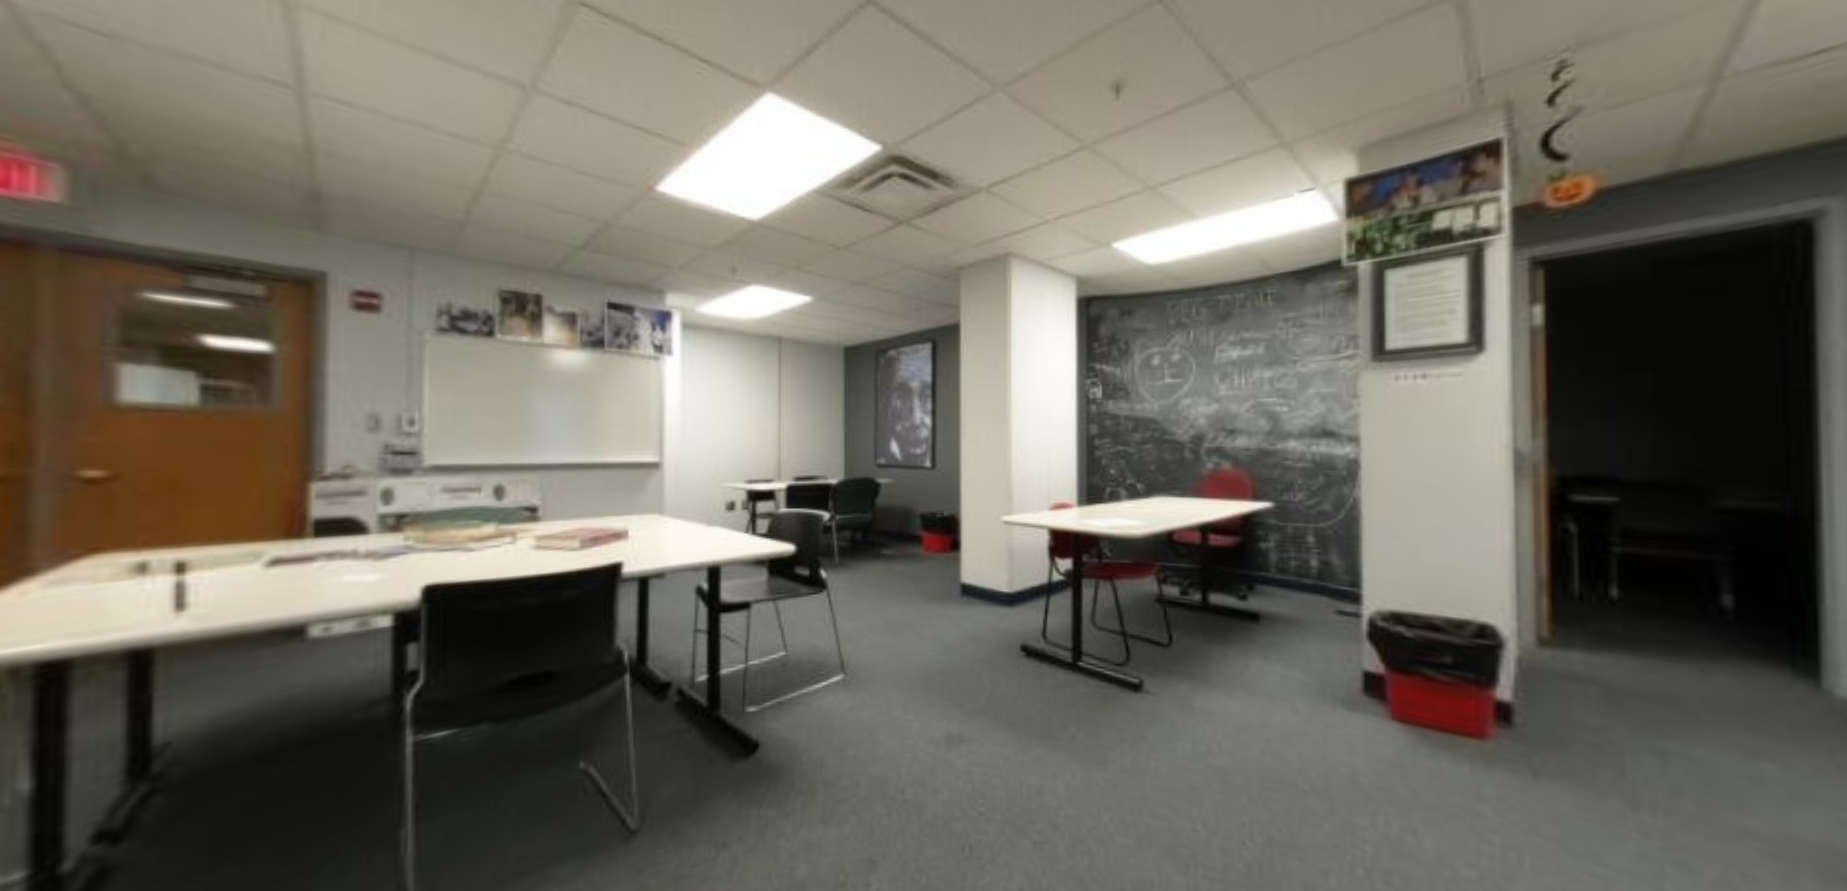 "Before" photo of main area, dark study rooms behind doors, two small rectangular tables.